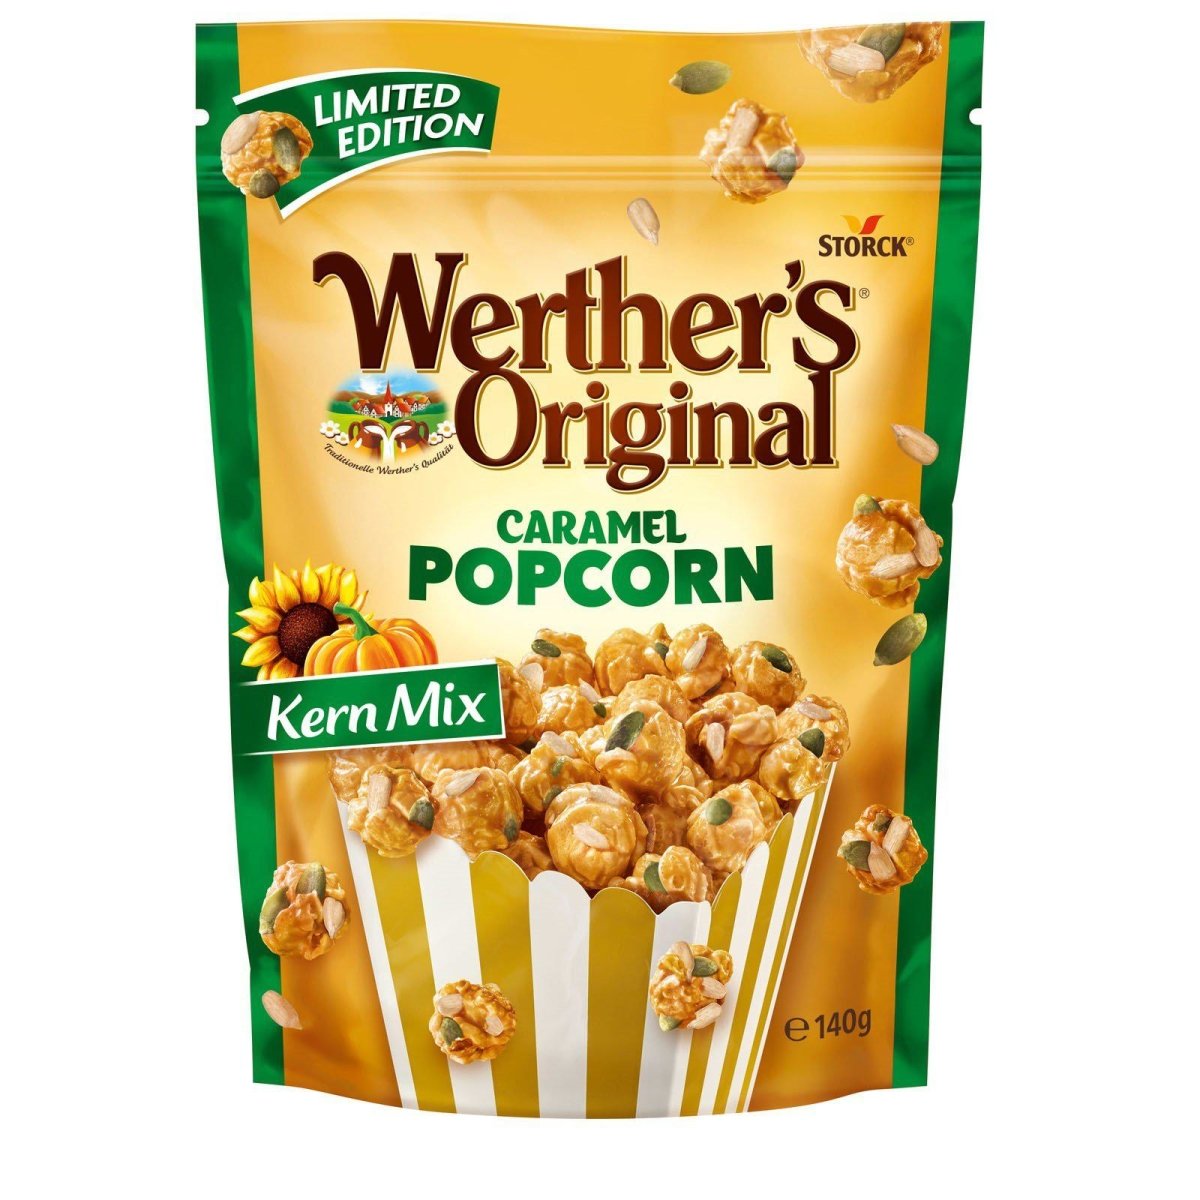 Werther's Limited Edition Caramel Popcorn Kern Mix (Germany) 140 g - Candy Mail UK